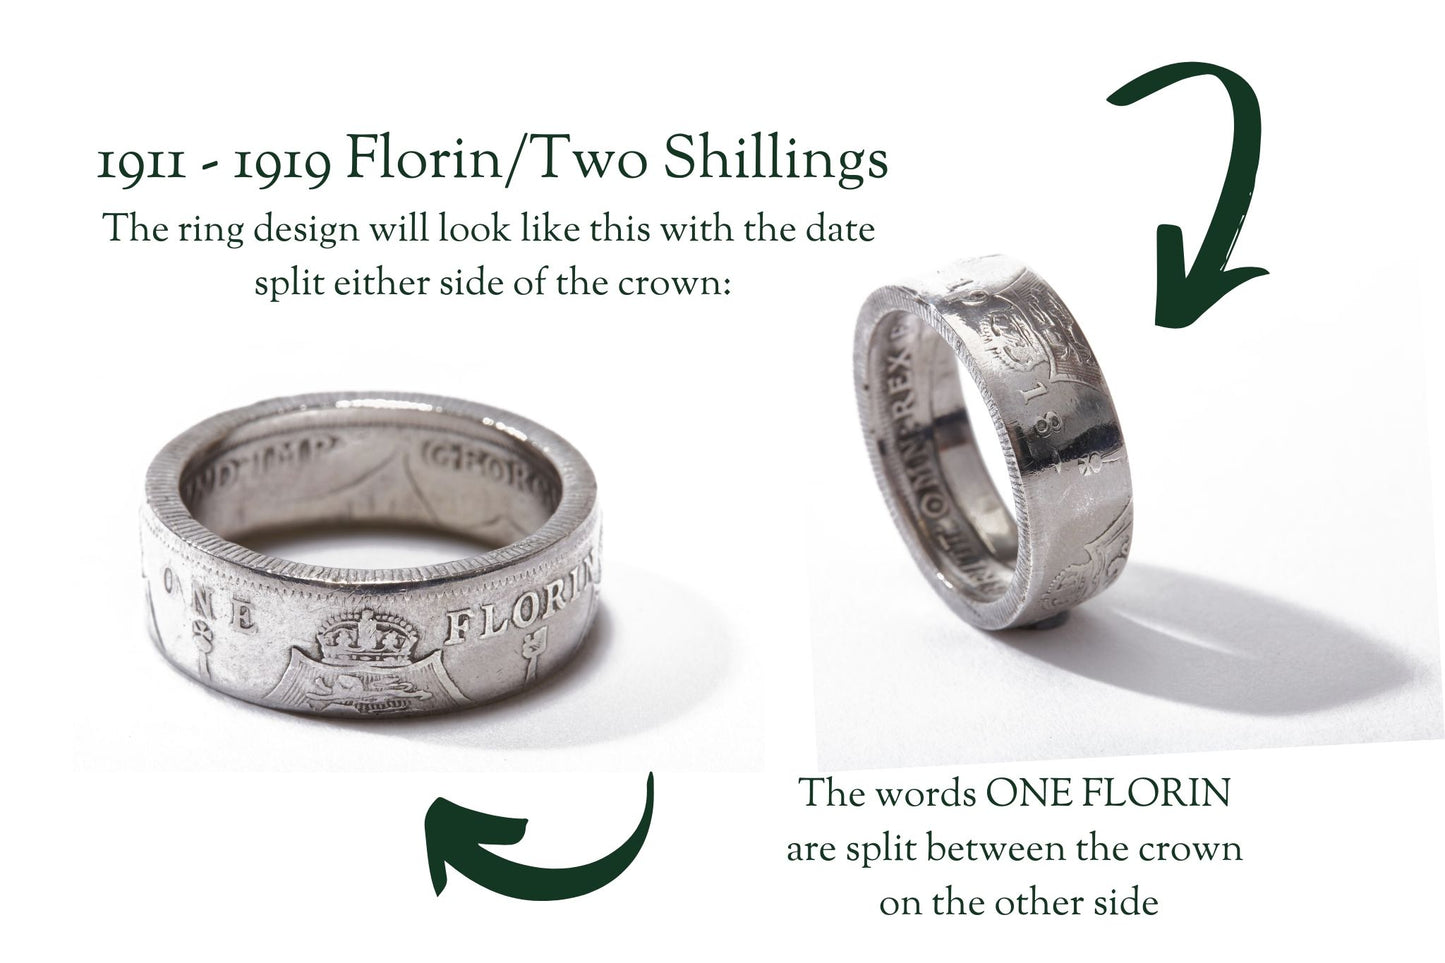 1911 - 1919 florin coin ring infographic